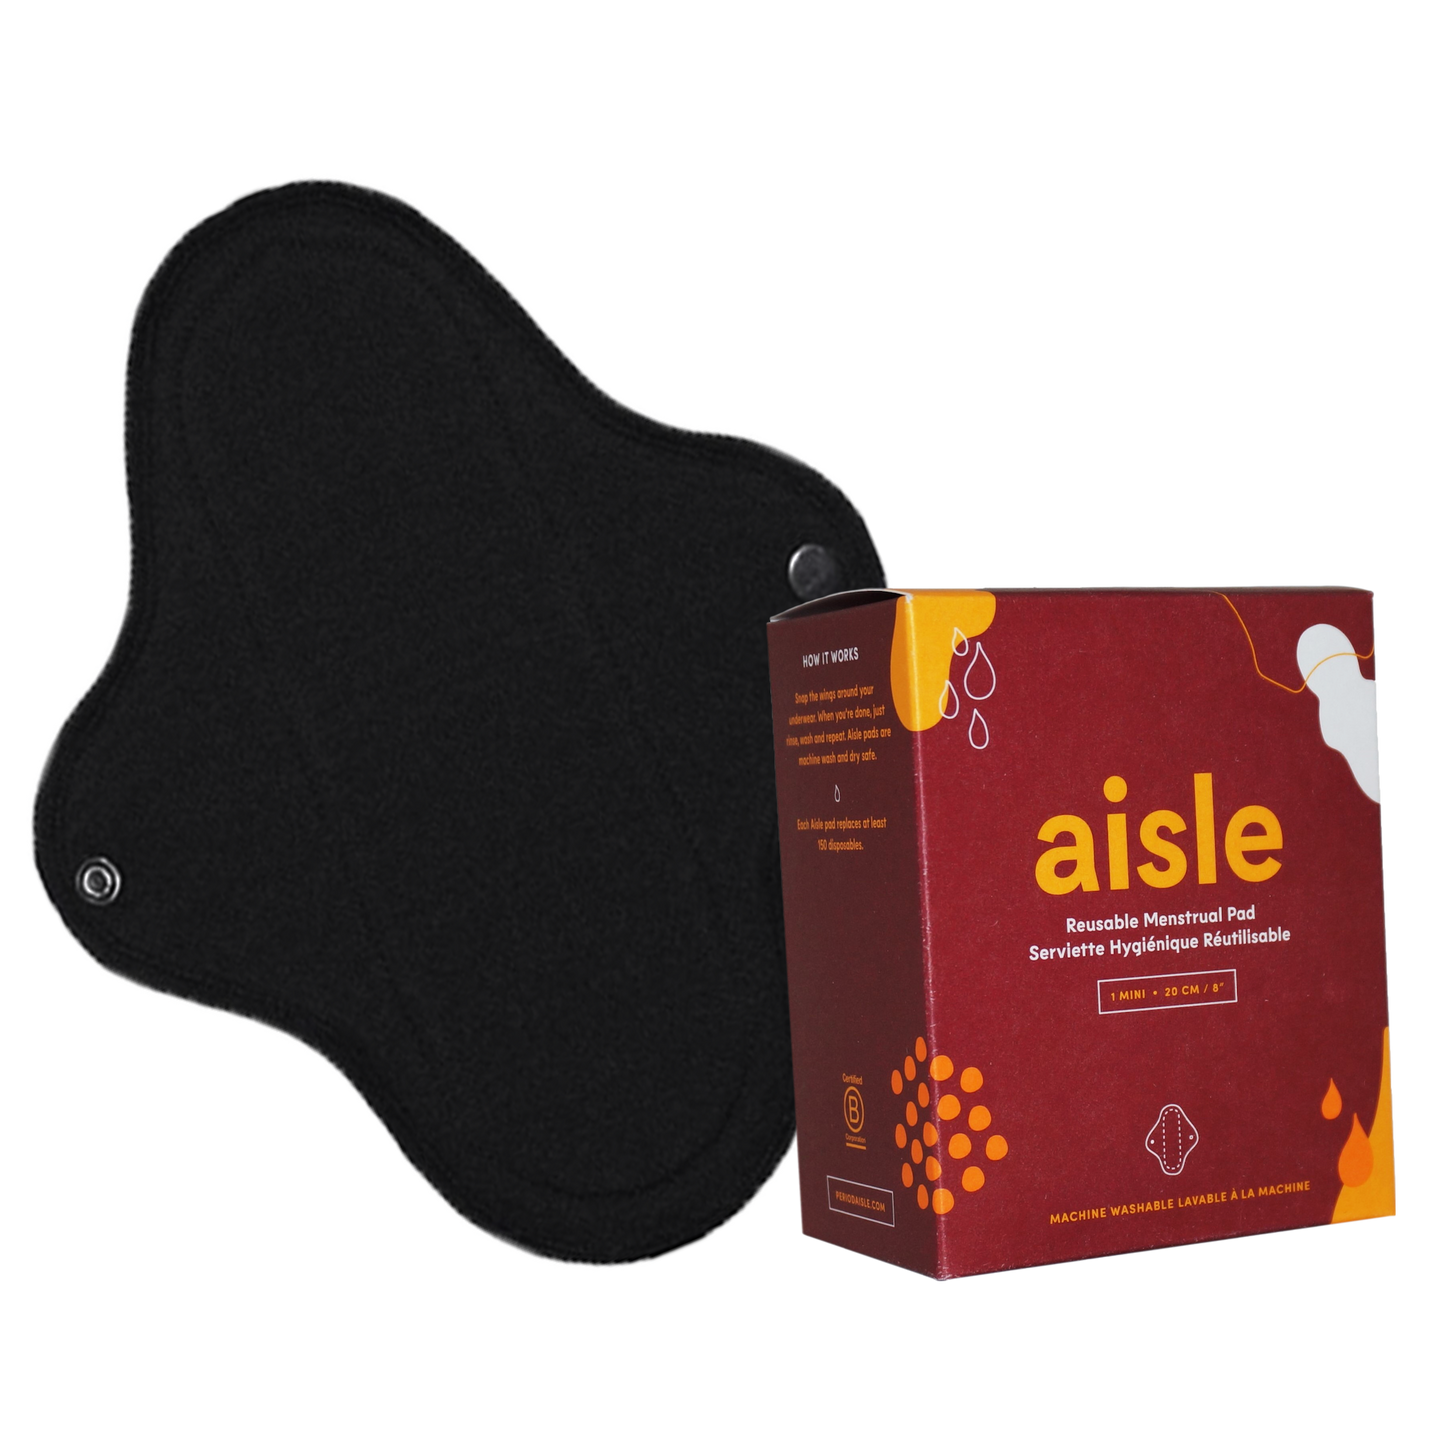 Aisle reusable cloth pad size Mini packaging with one black pad